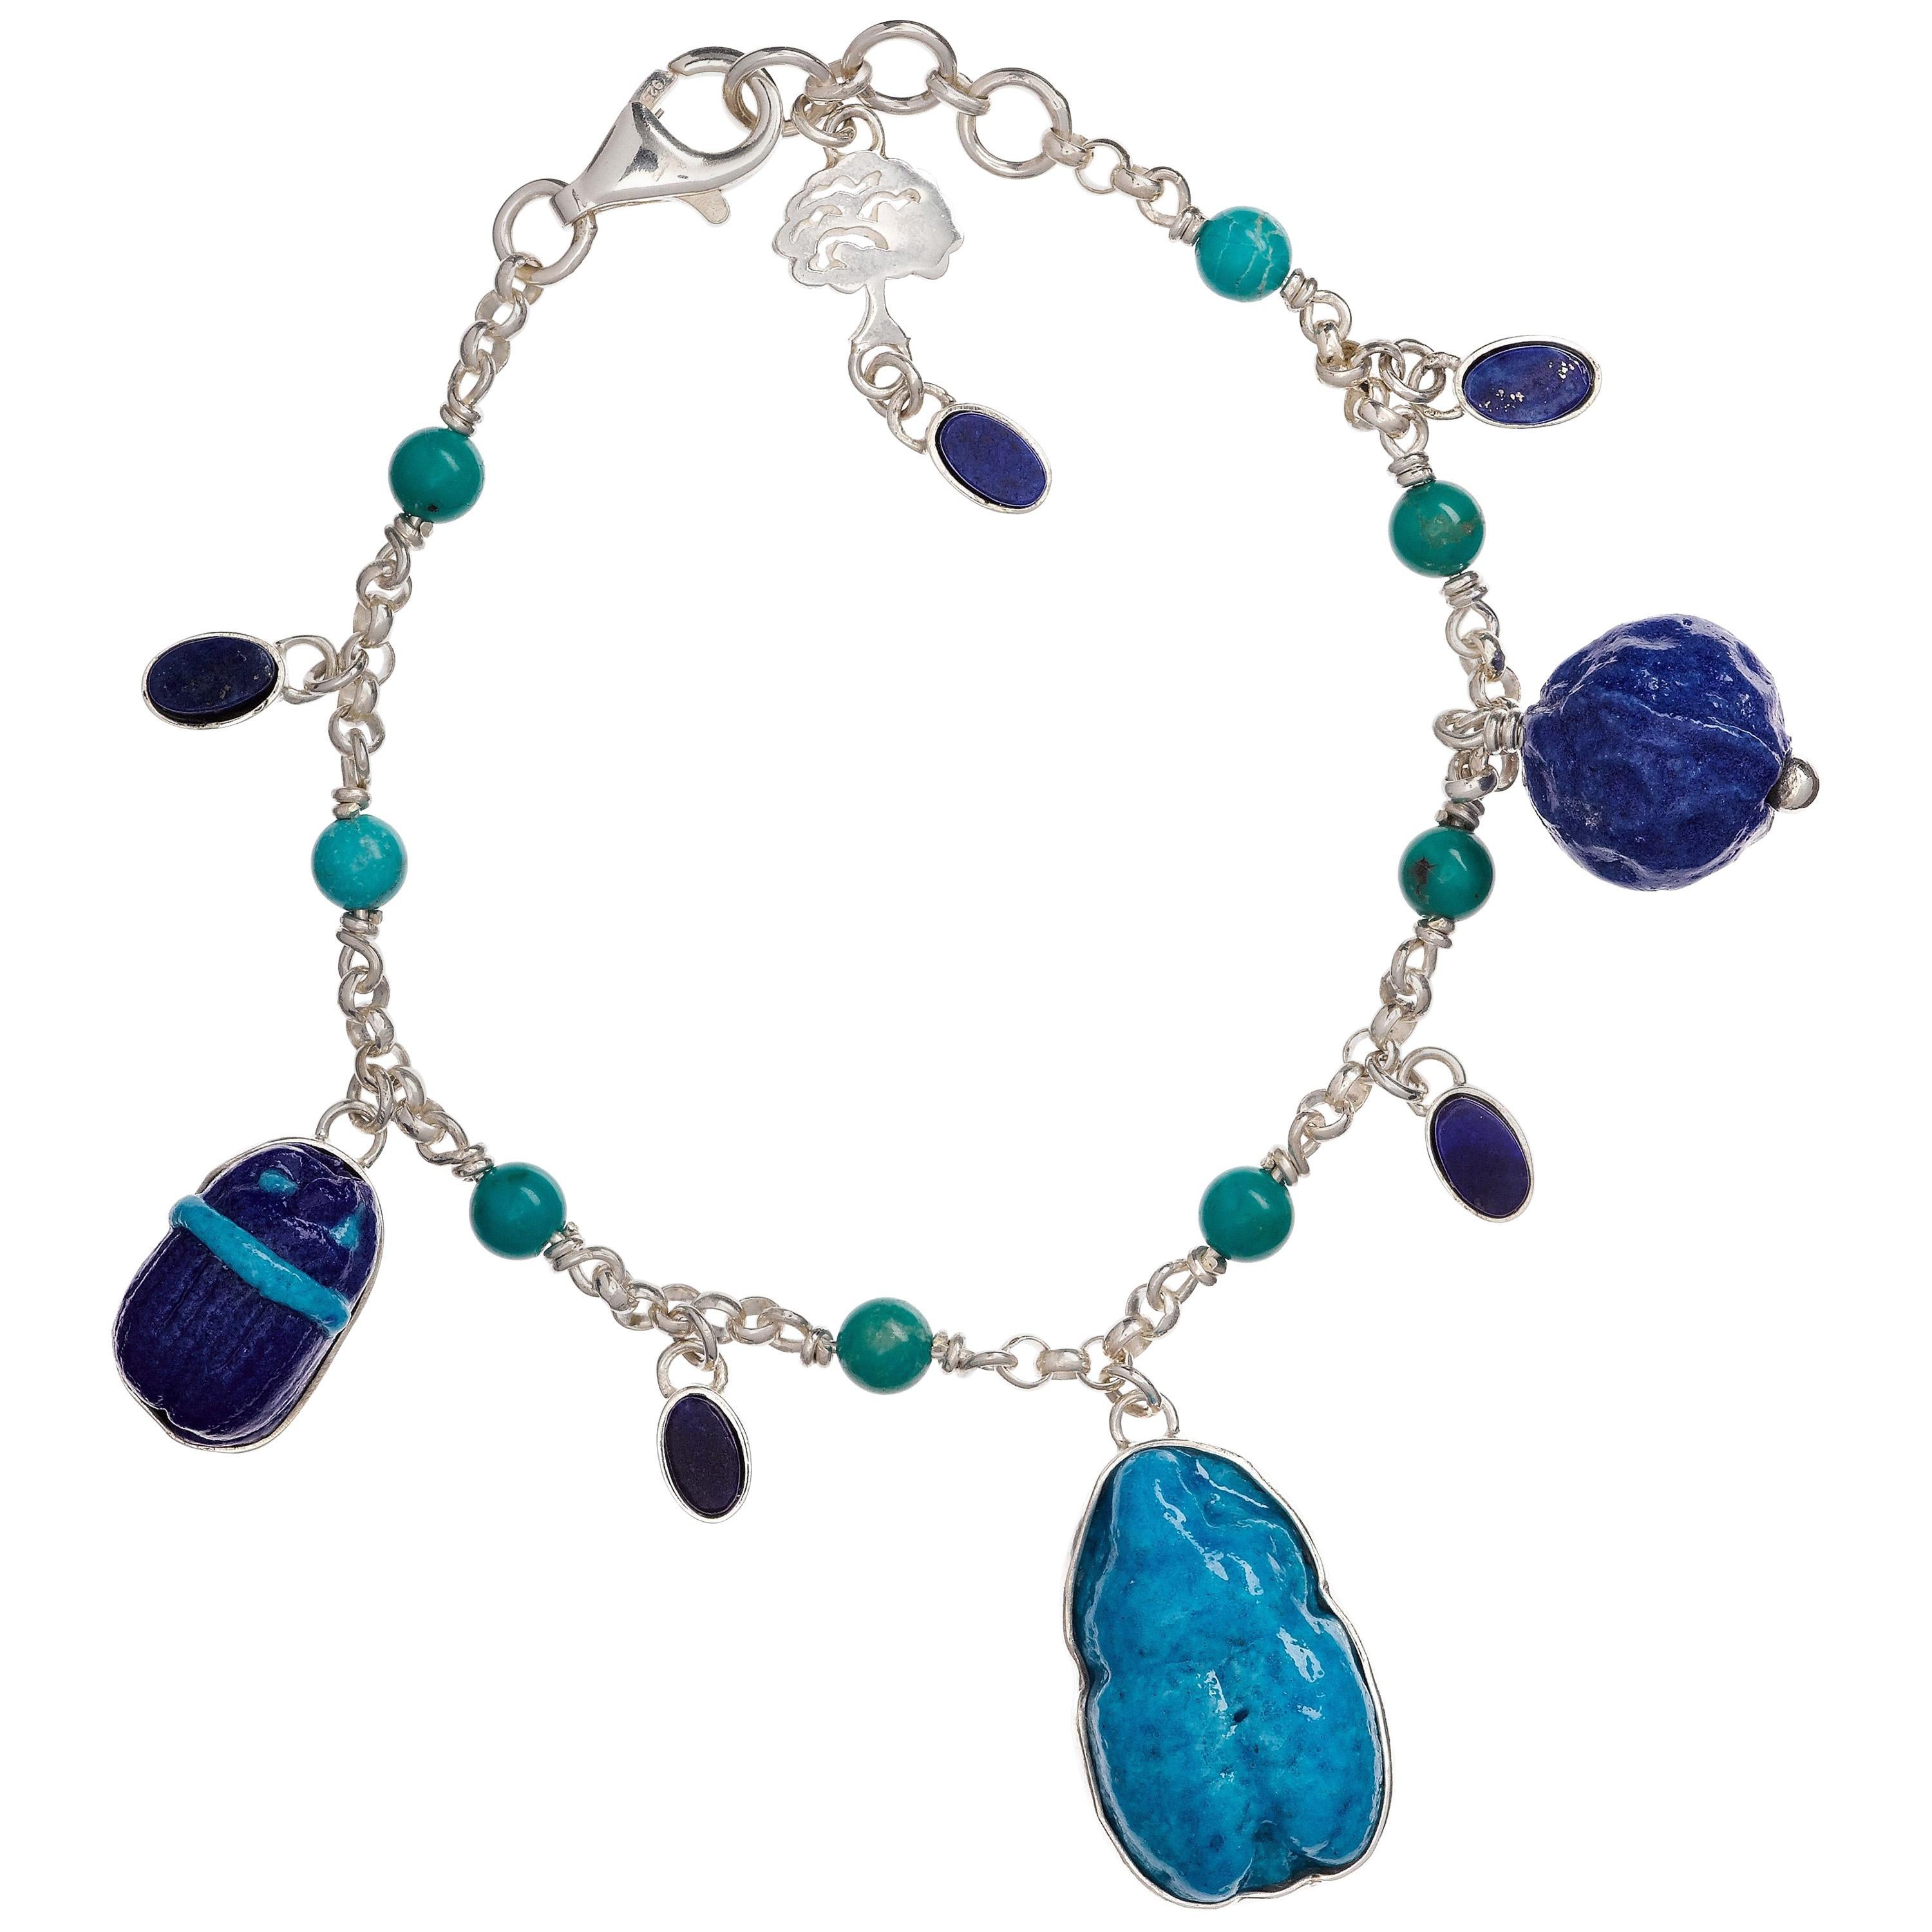 Egyptian Faience Charm Bracelet with Lapis and Turquoise Accents For Sale